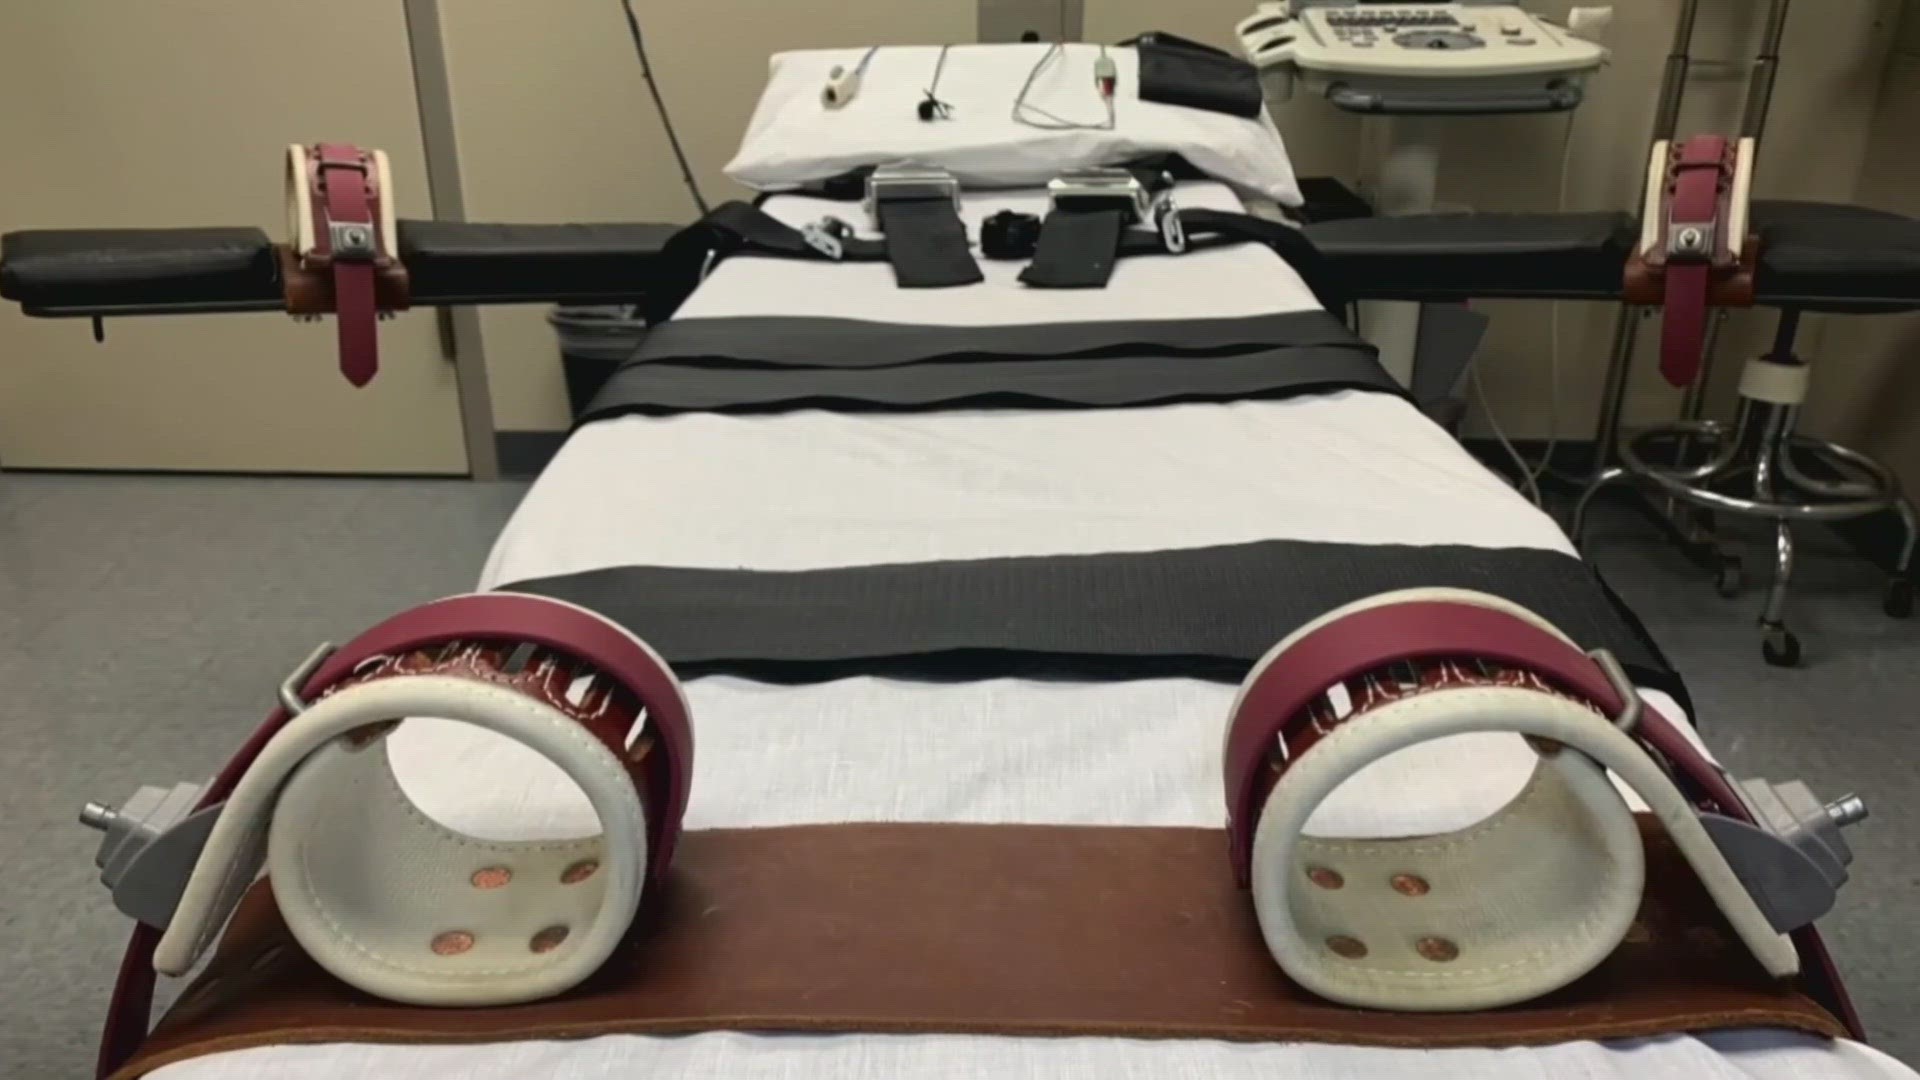 Louisiana has had trouble getting the drugs needed for lethal injections, so executions have been on hold. Lethal injection is currently the only legal method.